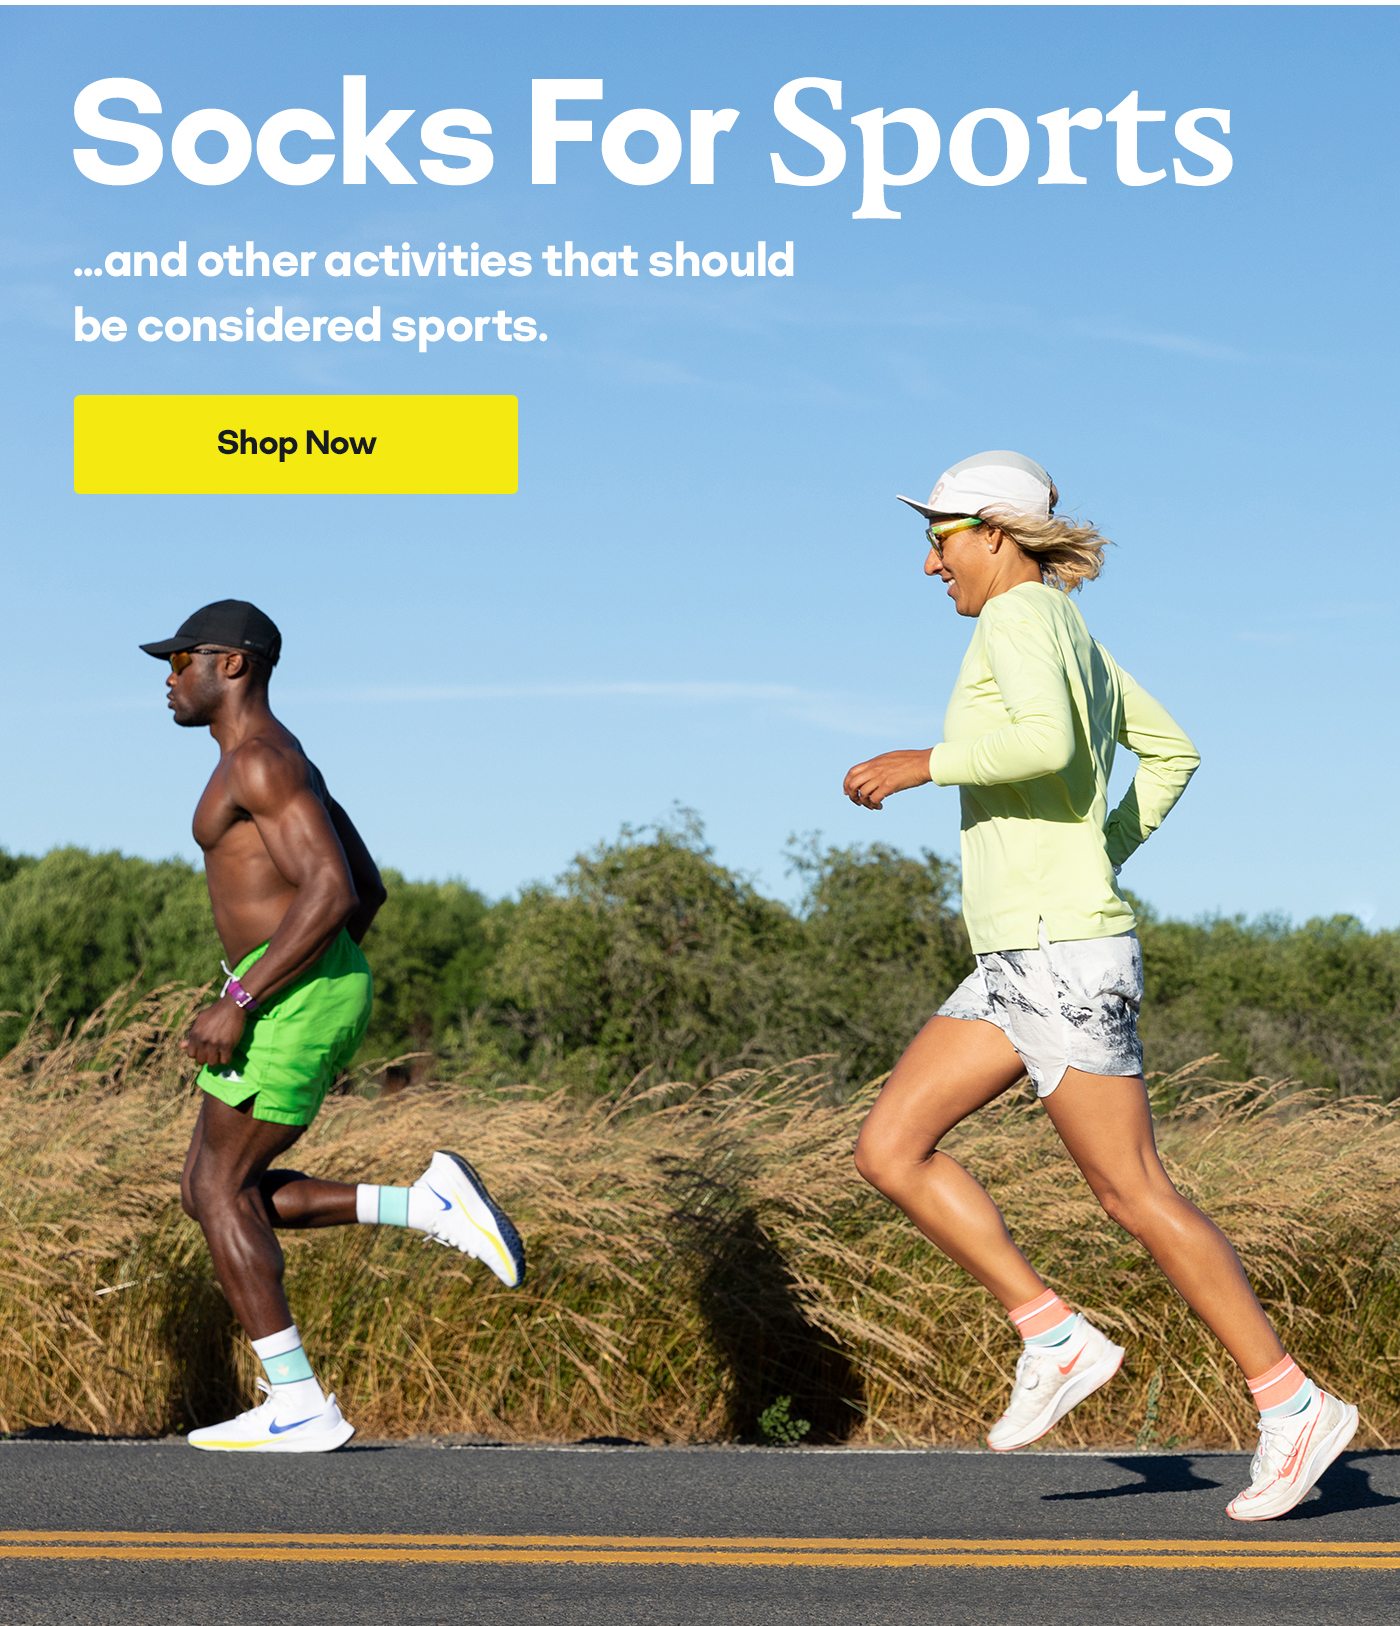 Socks For Sports... and other activities that should be considered sports. Shop Now.